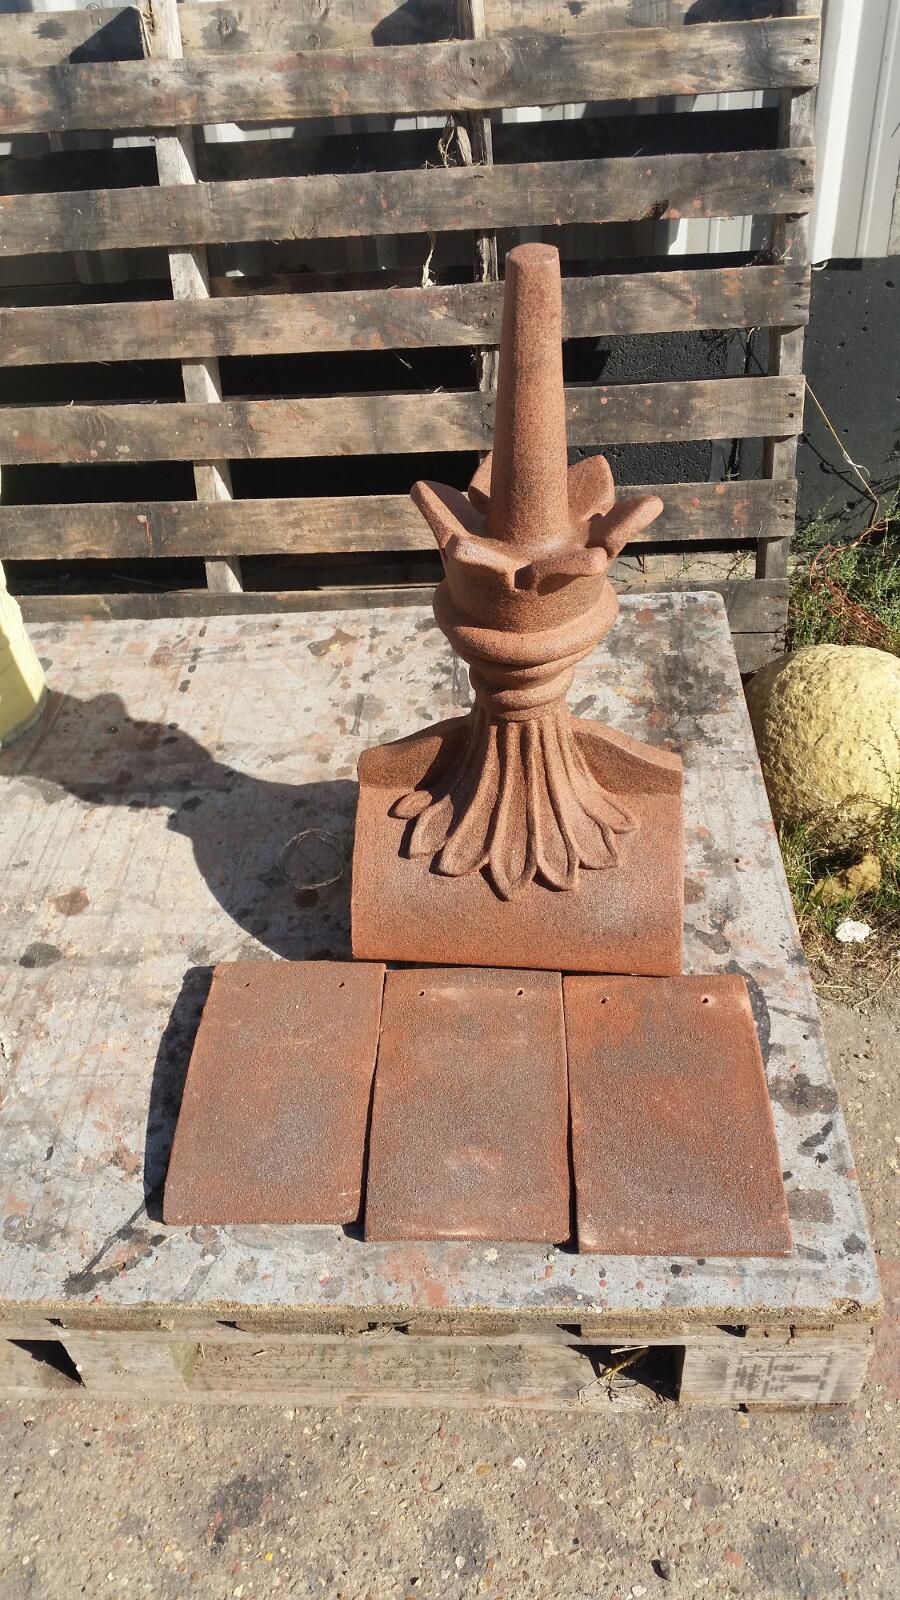 Heritage clay tiles colour matched roof finial